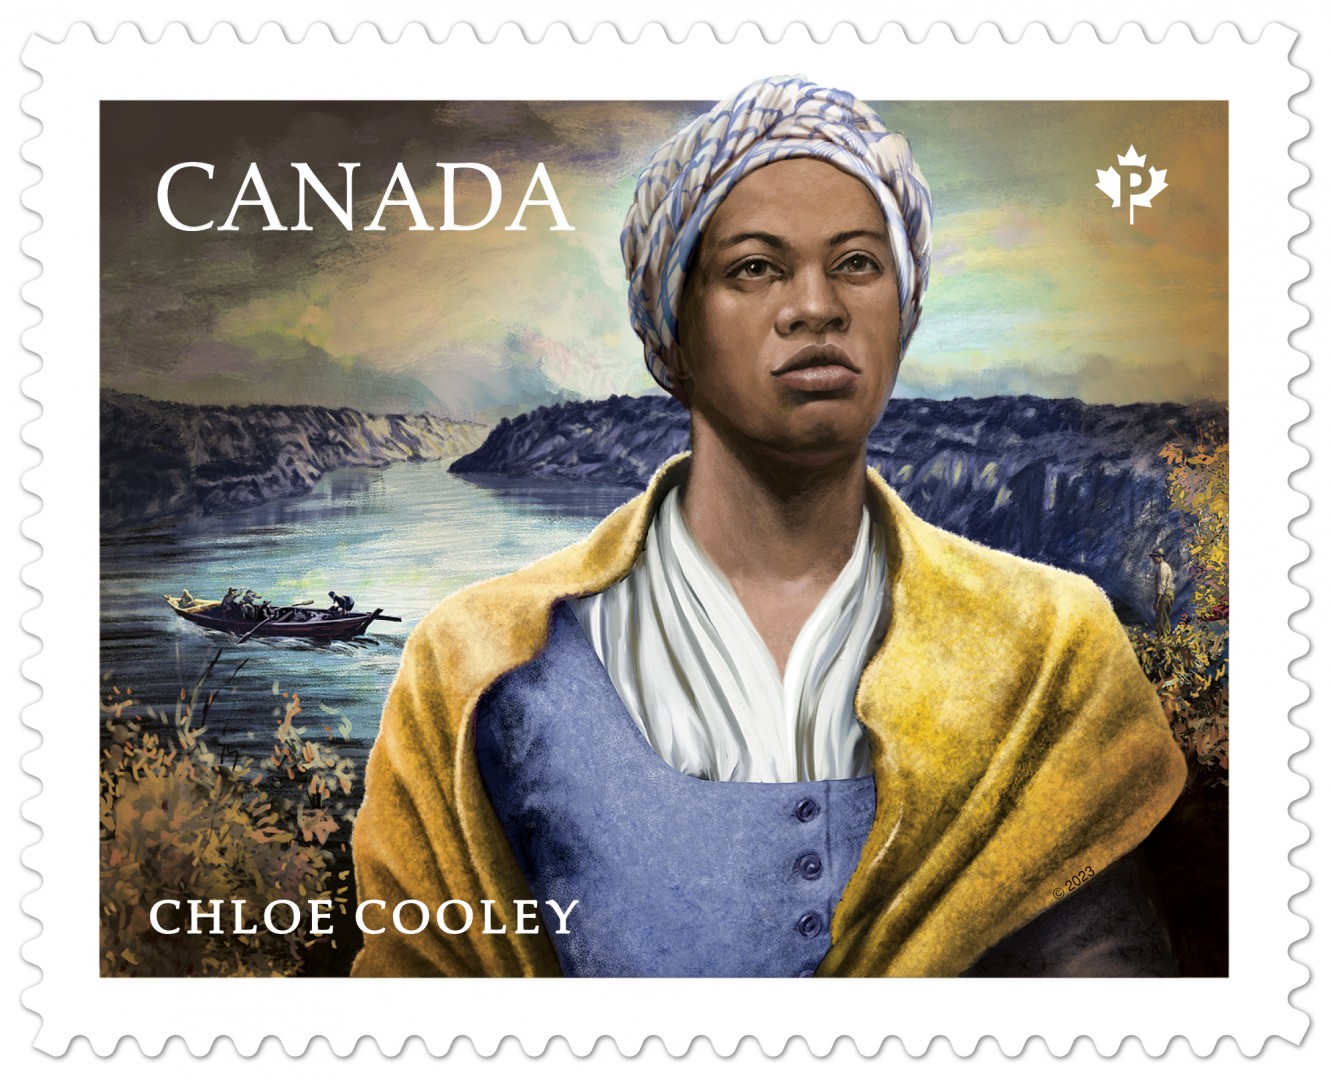 Chloe Cooley Stamp, courtesy of Canada Post